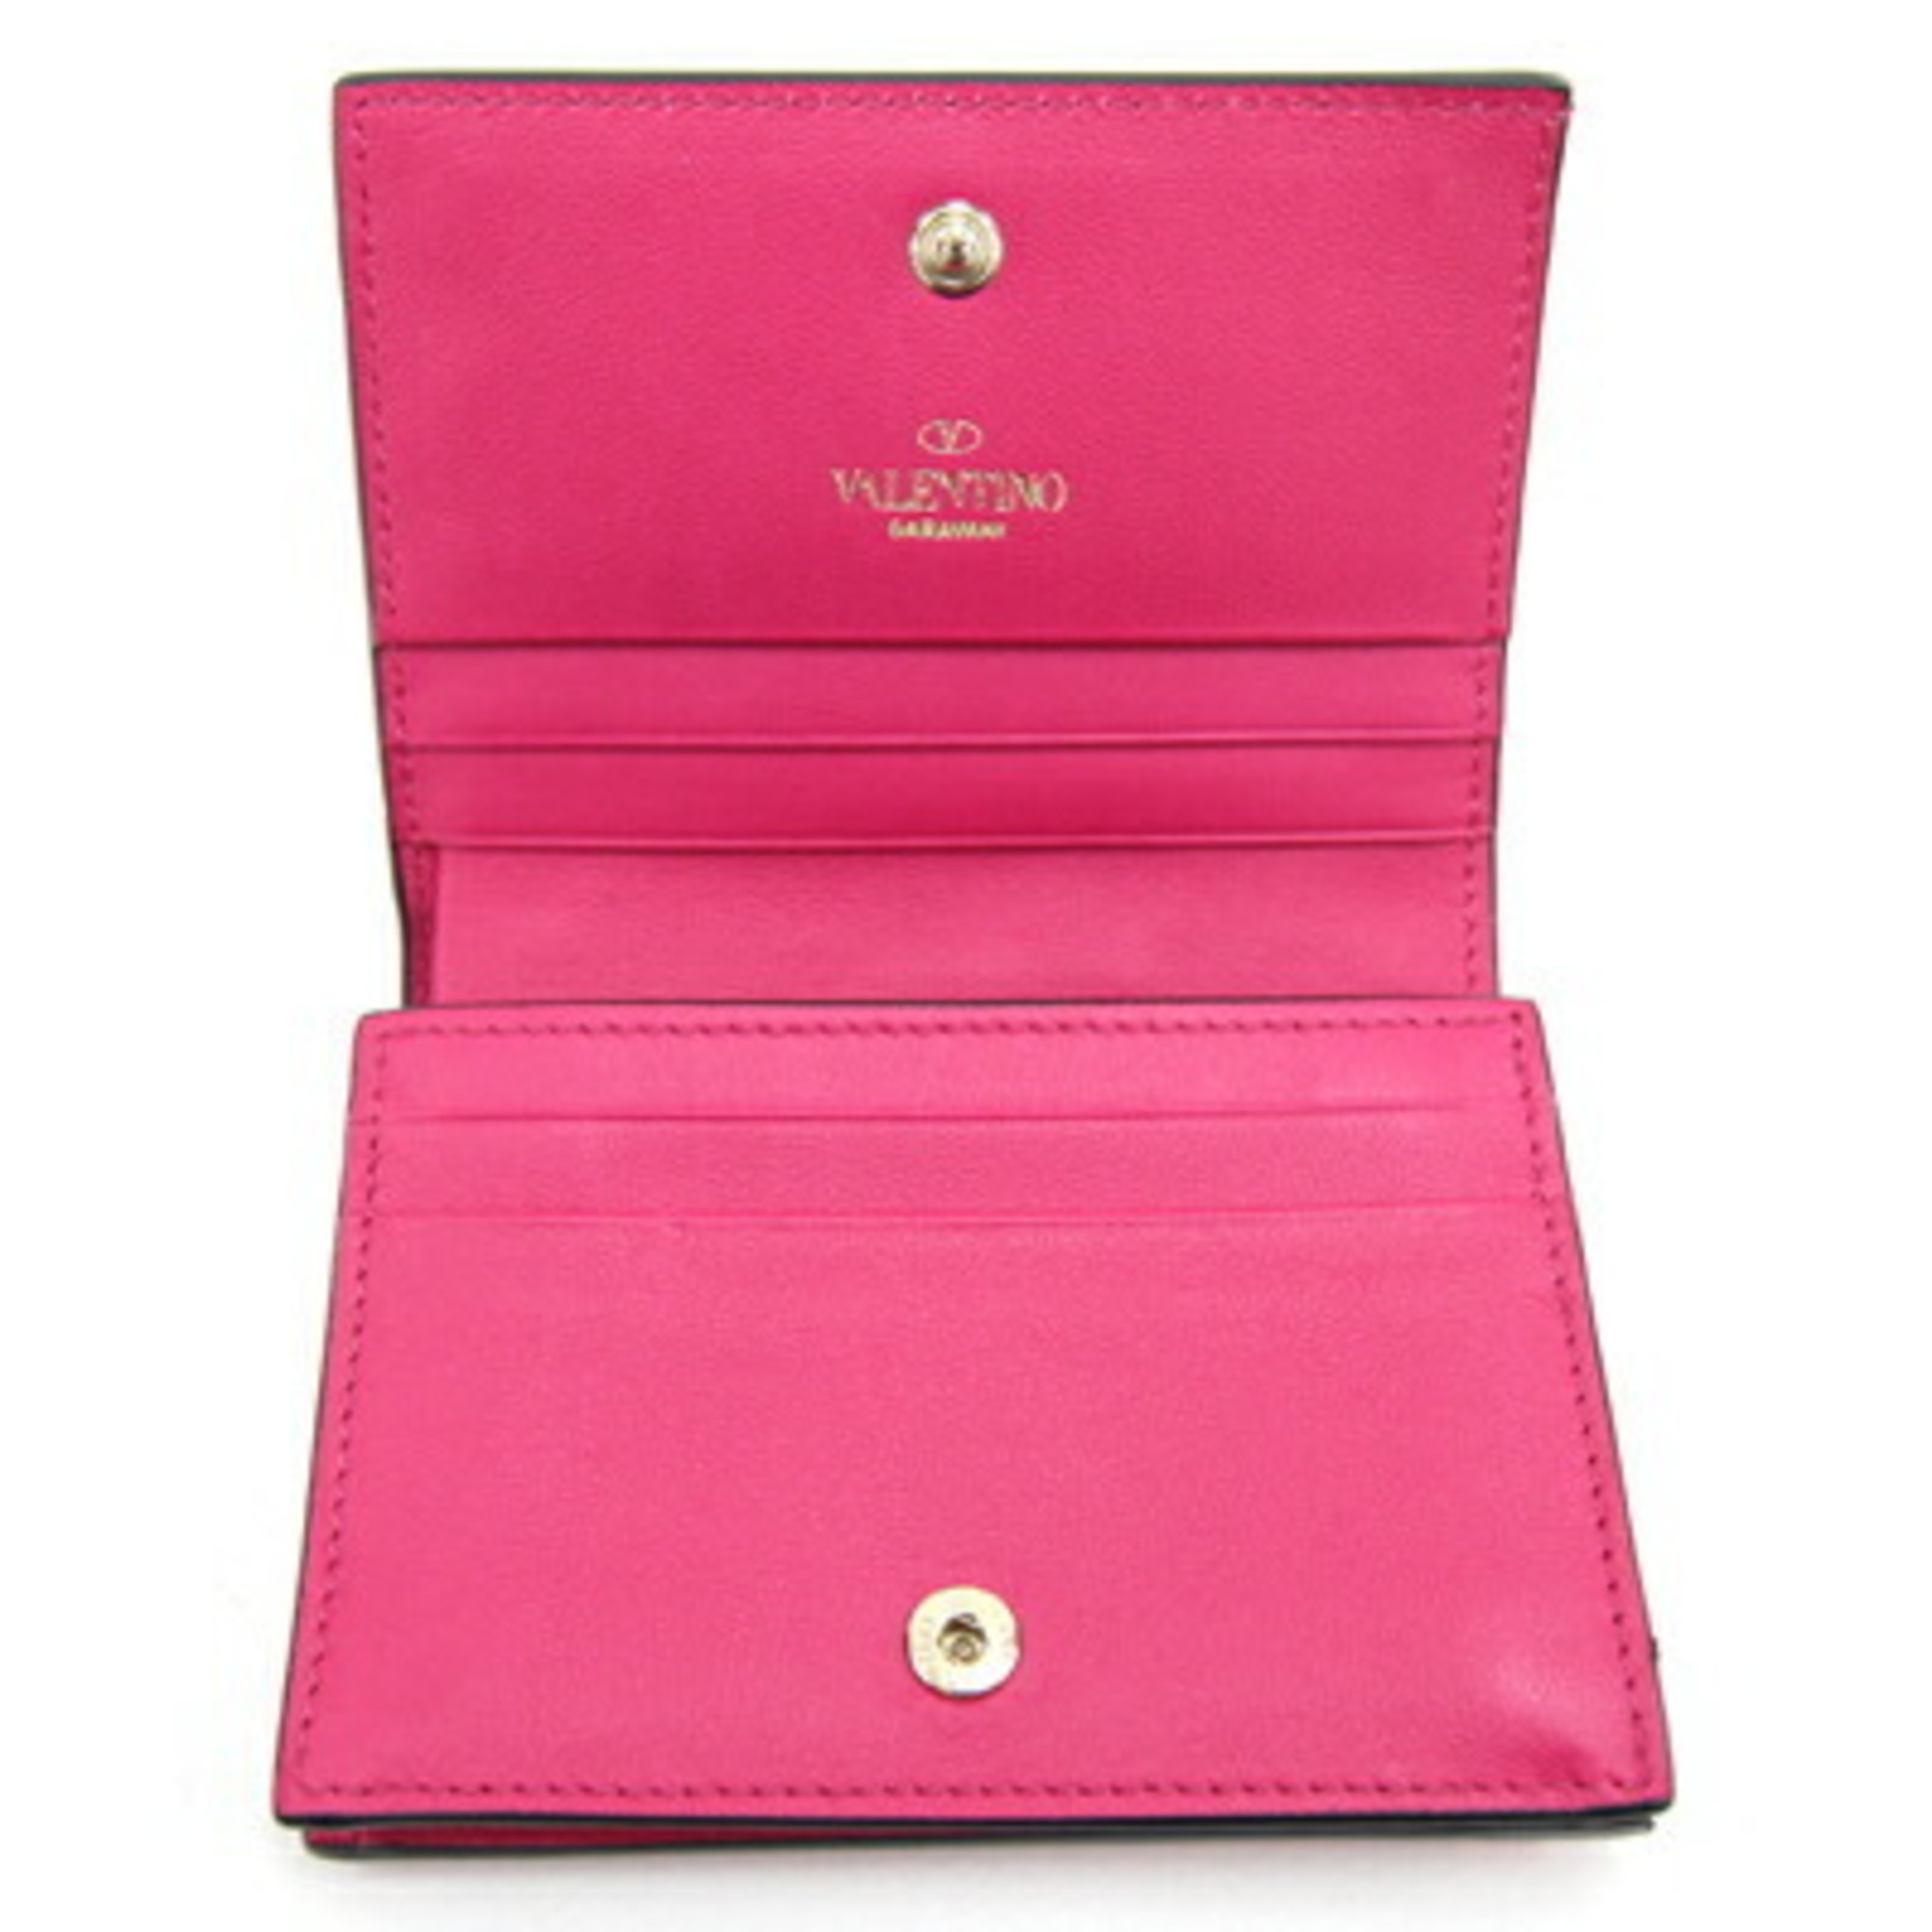 Valentino Bifold Wallet Rockstuds PW2P0P39 Pink Leather Compact Studs Small Ladies VALENTINO